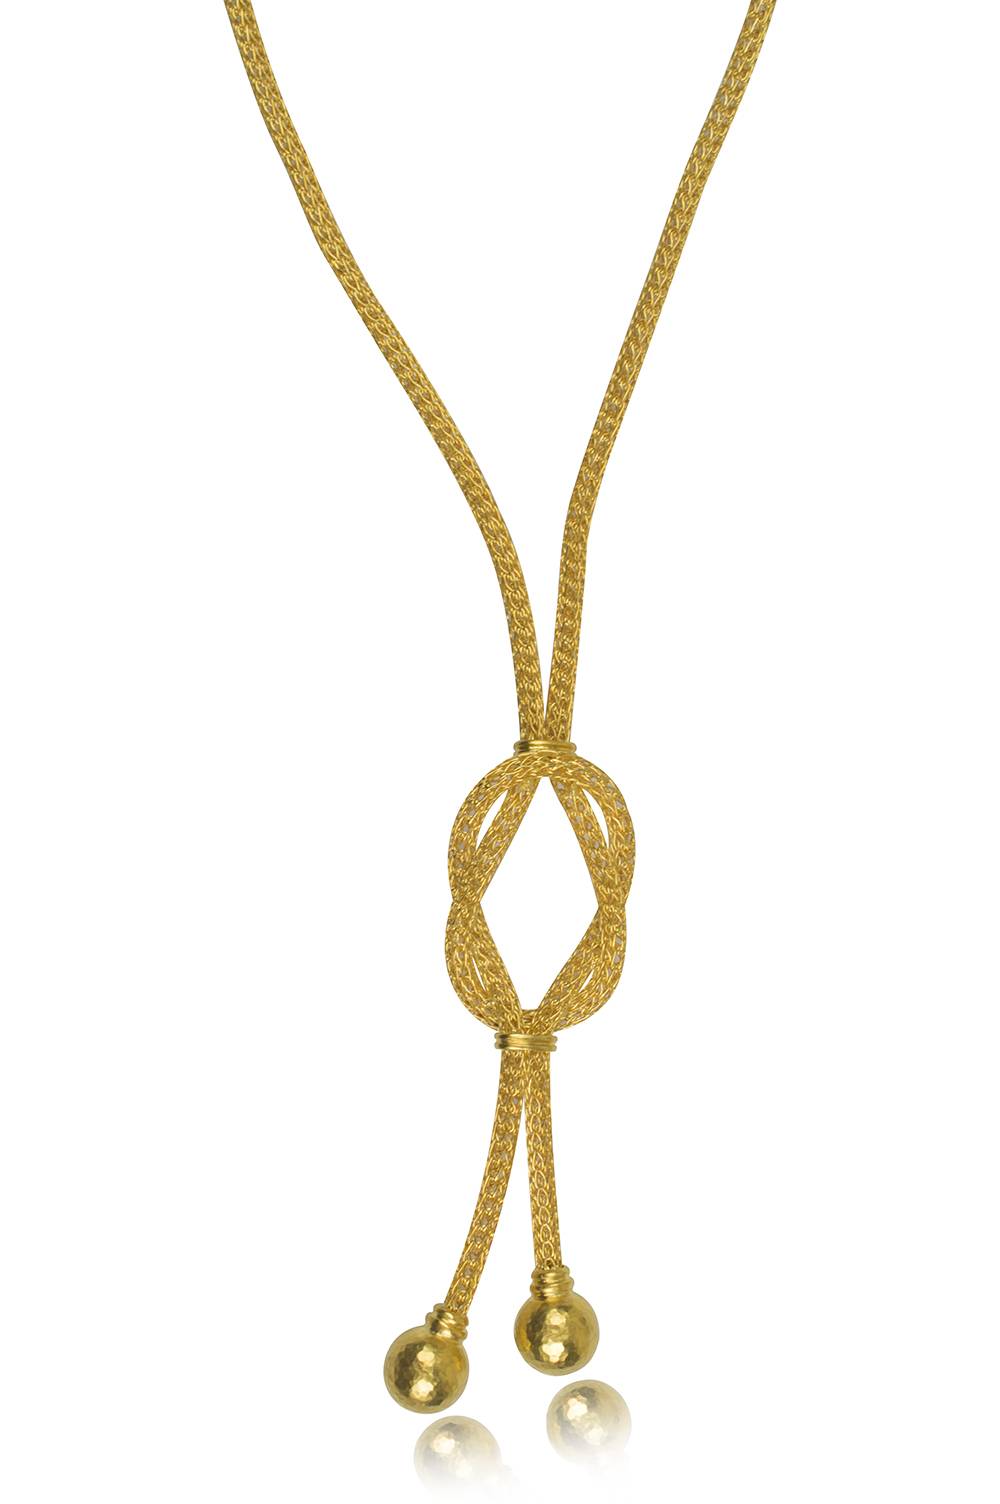 Hercules knot hand-woven sautoir necklace with lion heads in 18k gold  embellished with diamonds and sapphires - LALAoUNIS®